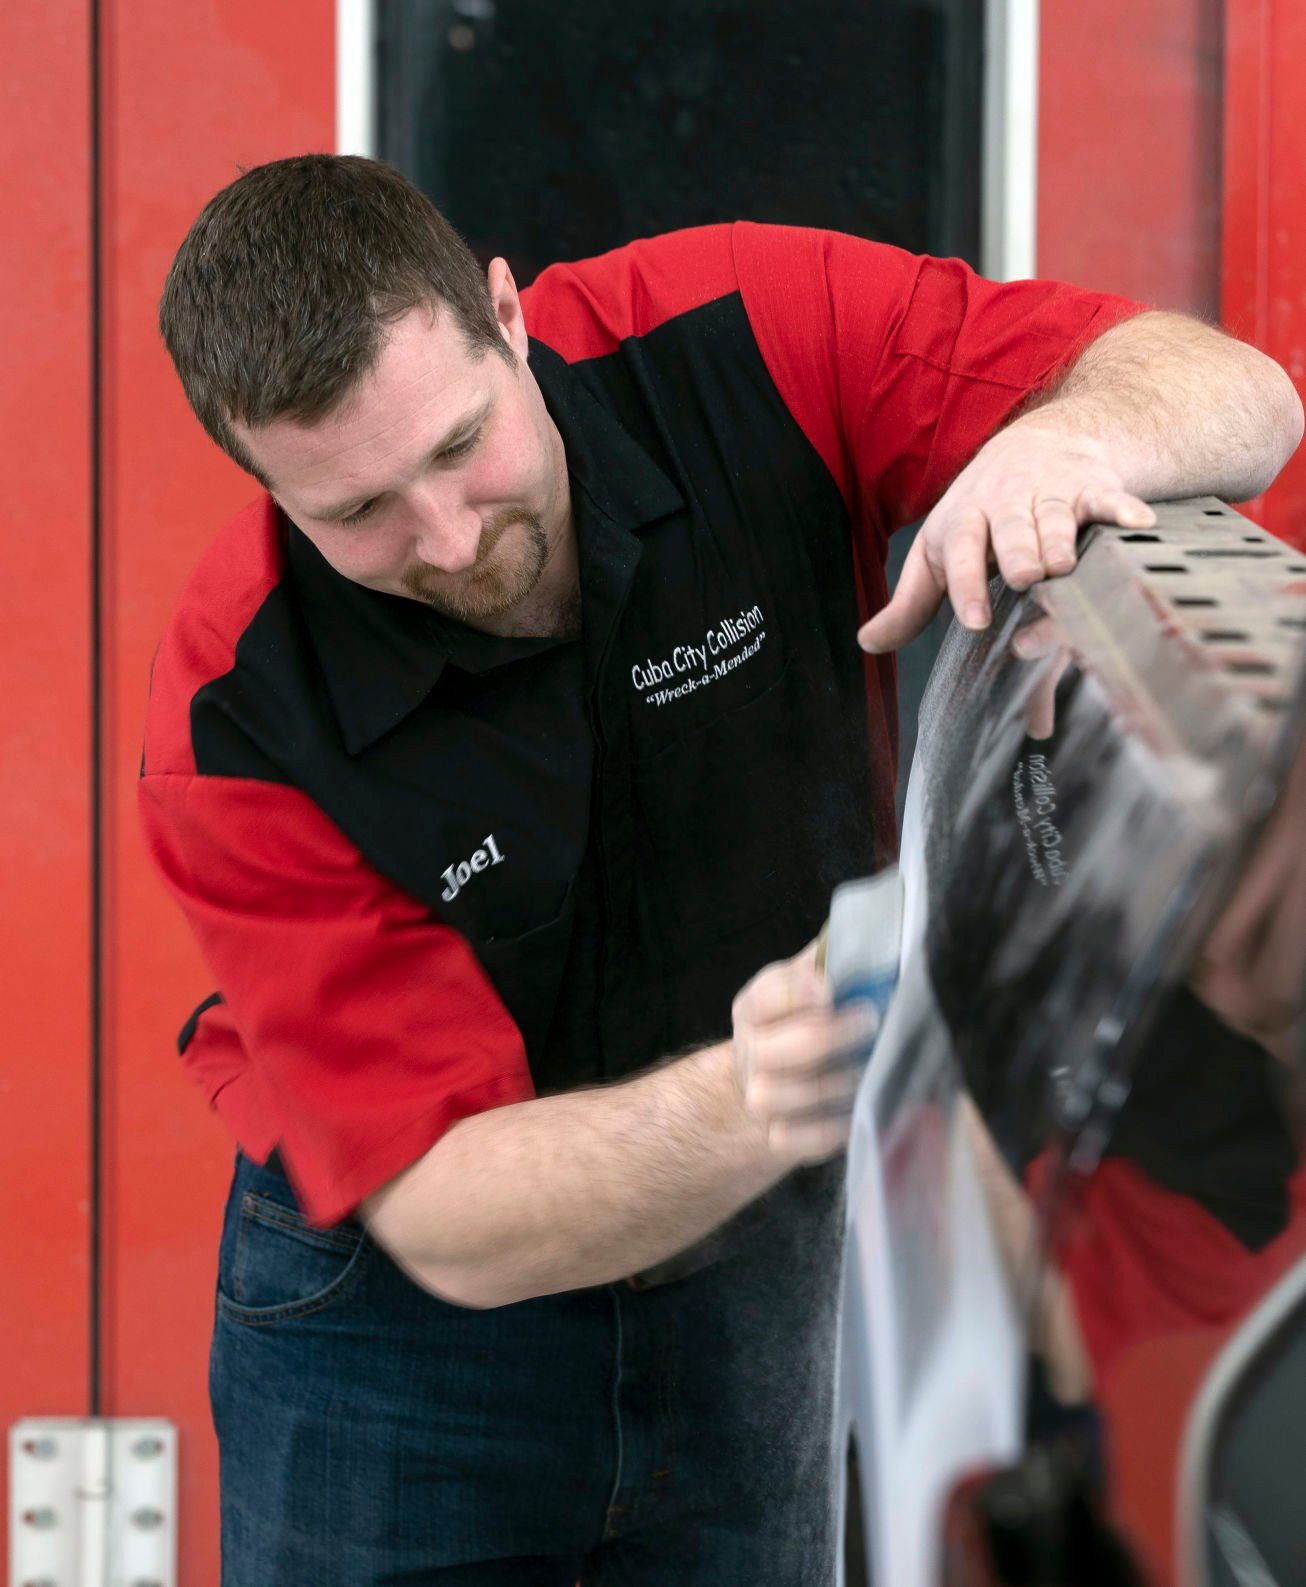 Cuba City Collision owner Joel Groom works on a truck at his business in Cuba City, Wis., on Wednesday, March 9, 2022.    PHOTO CREDIT: Stephen Gassman